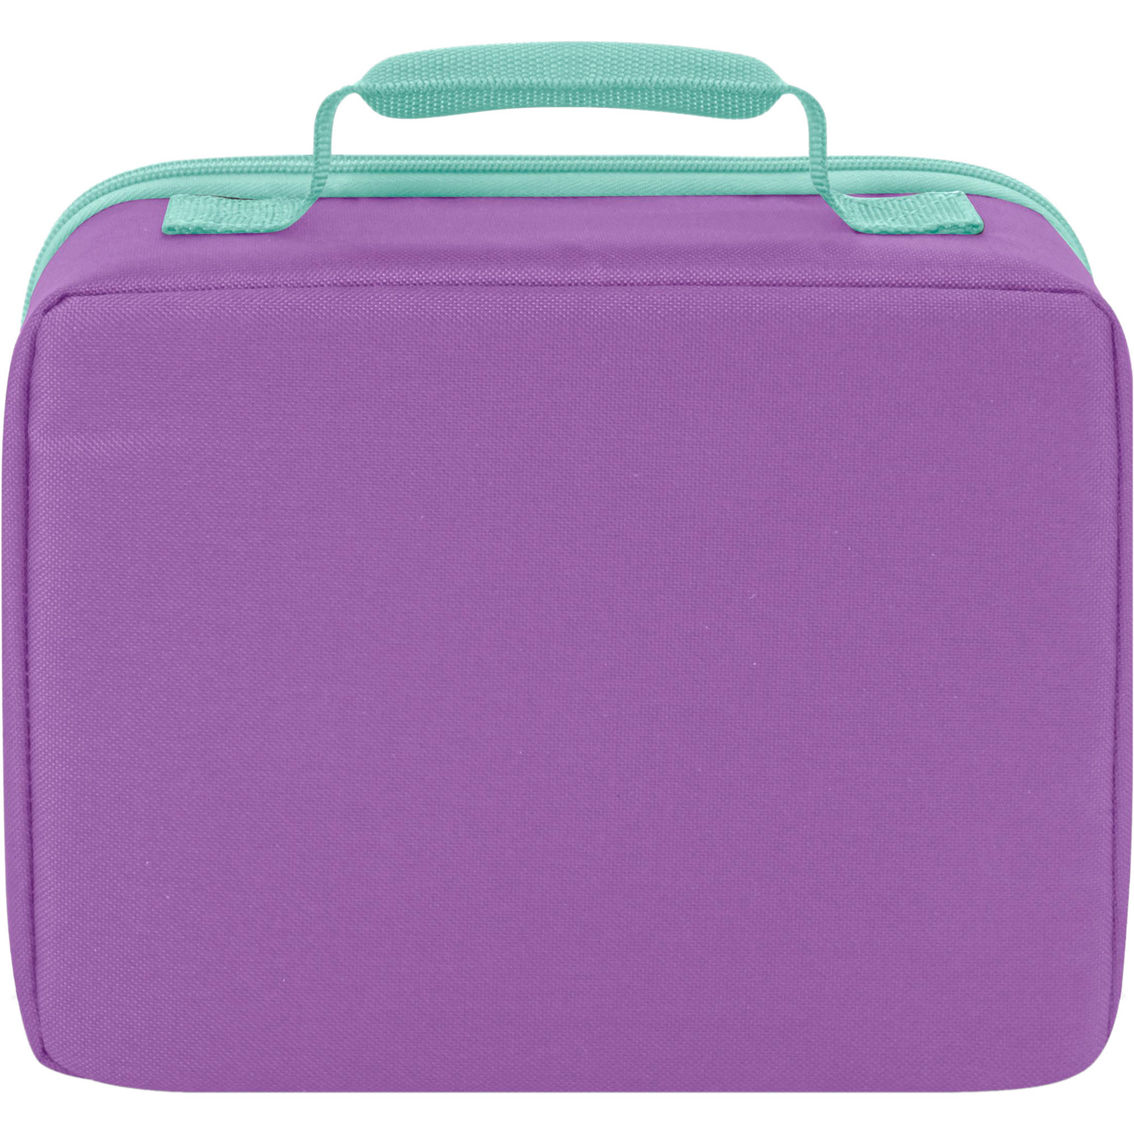 Thermos Purple Hearts Lunch Kit - Image 2 of 3